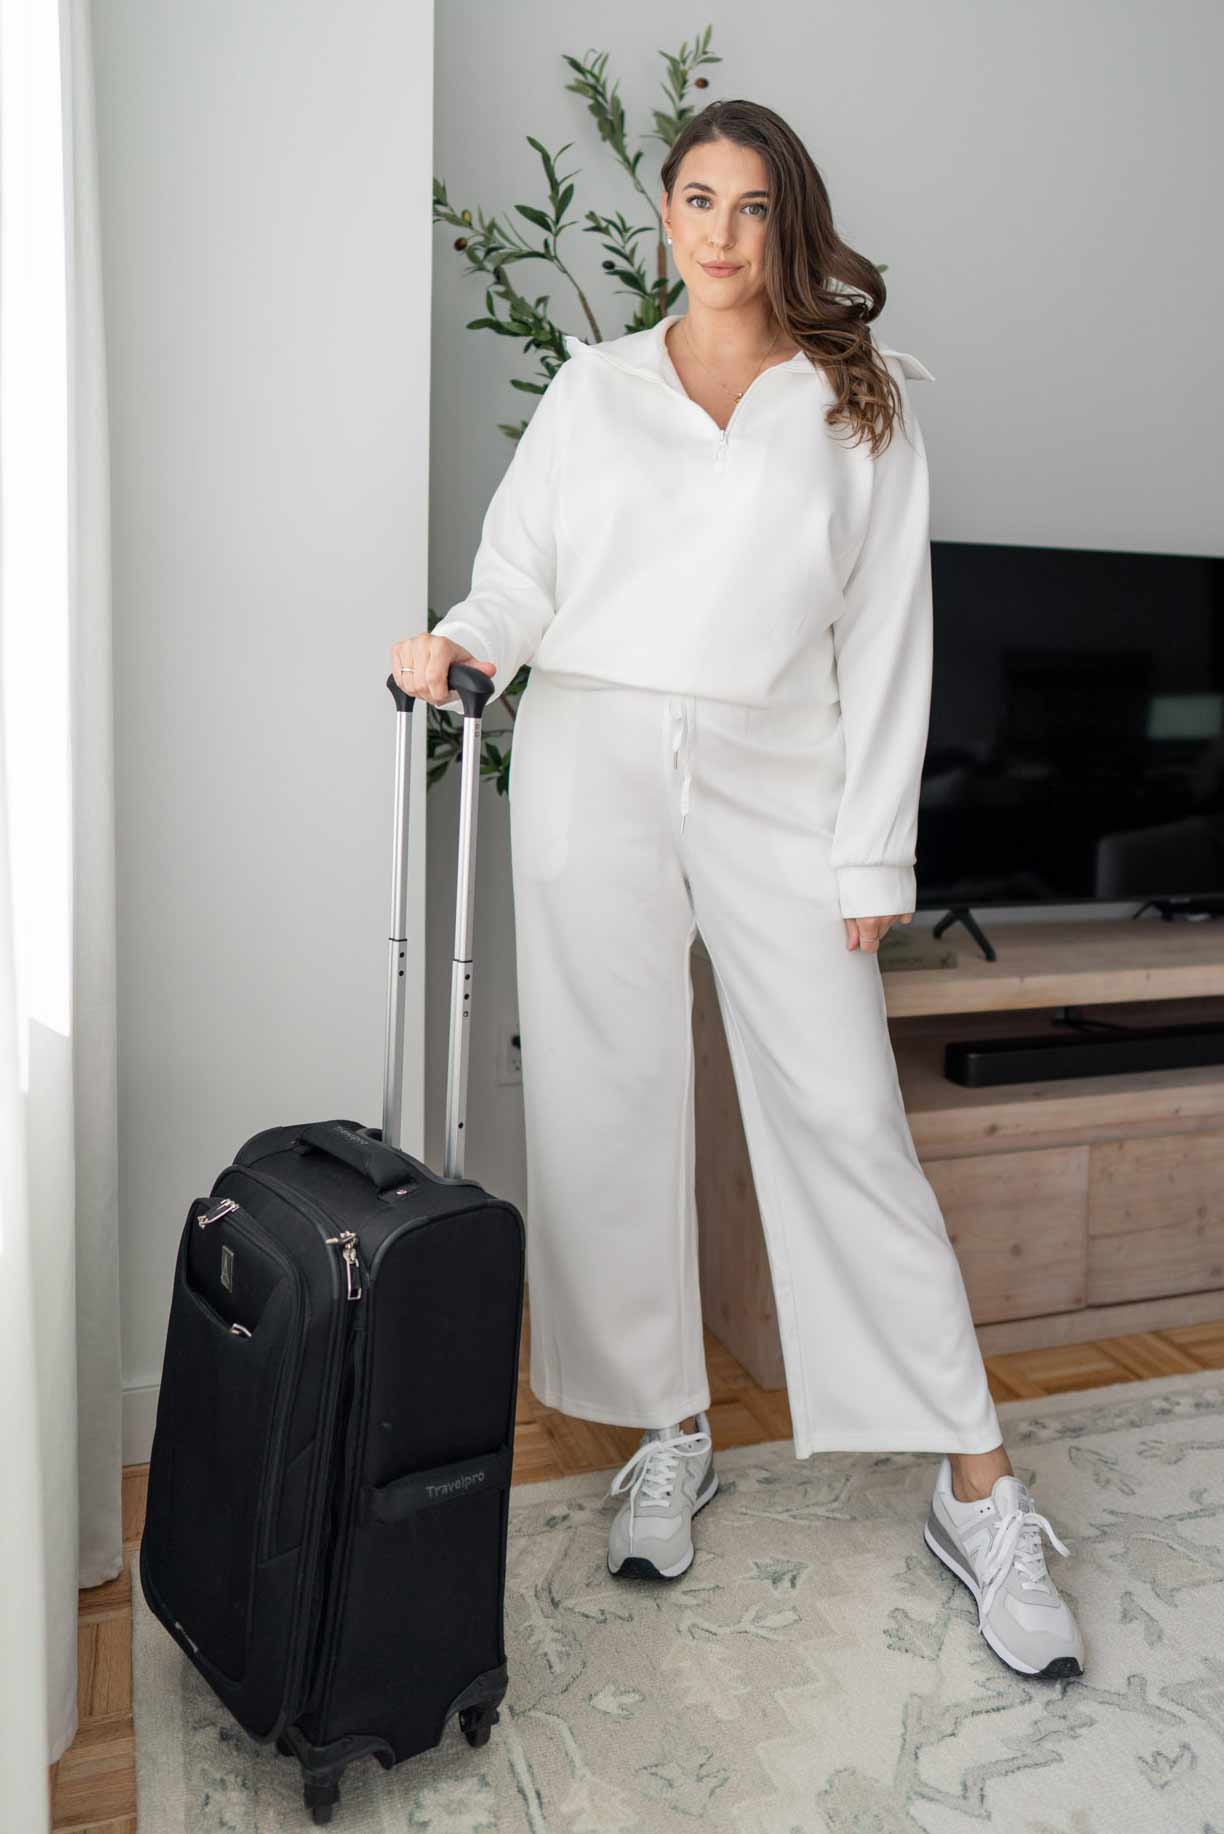 Monochrome travel outfit